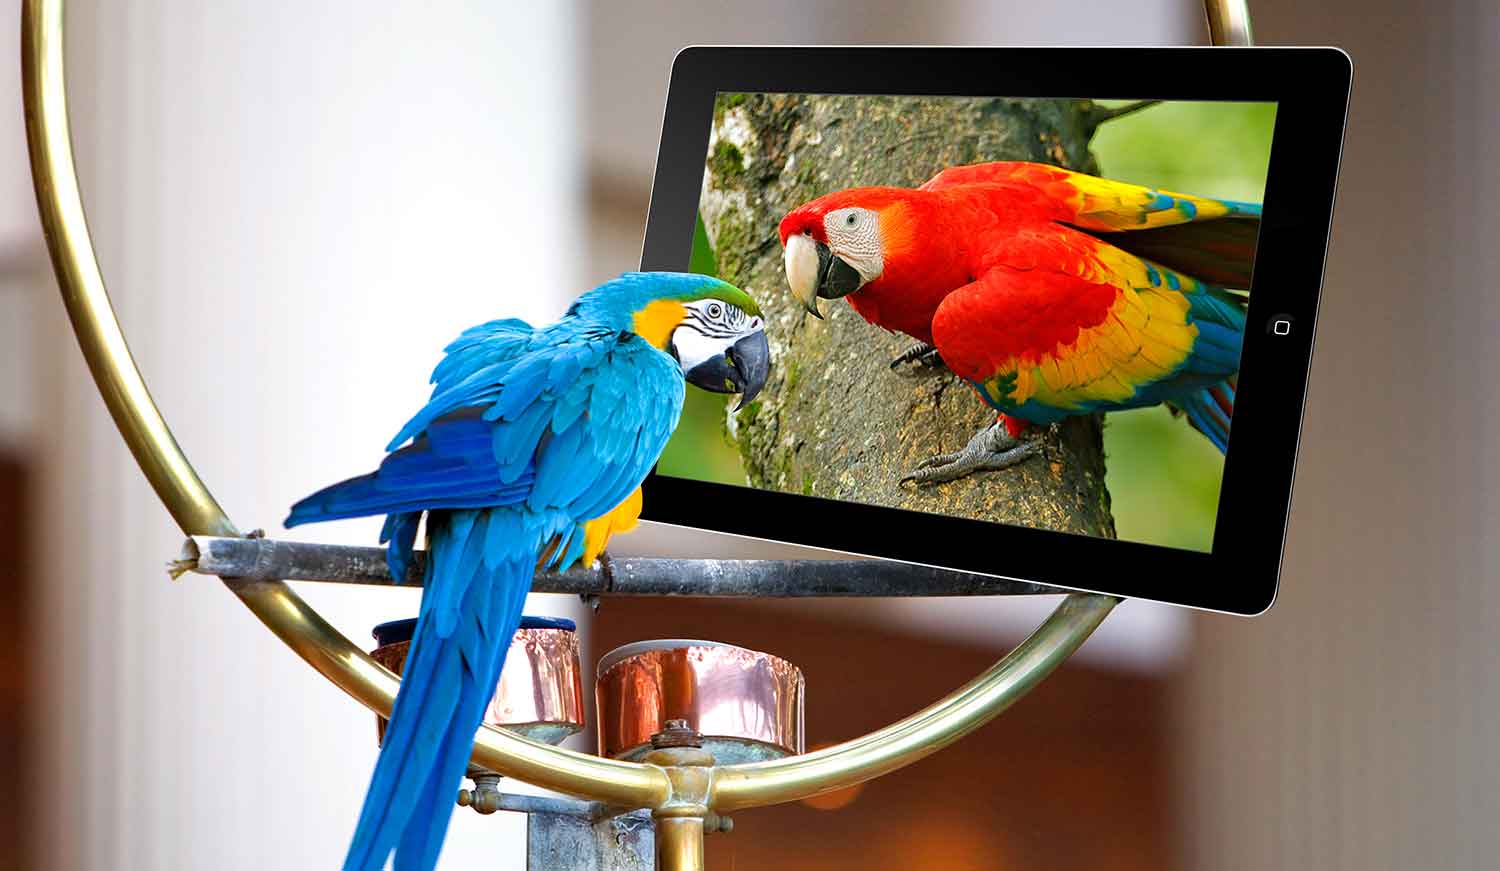 A parrot on a perch looks at a tablet screen showing another parrot.